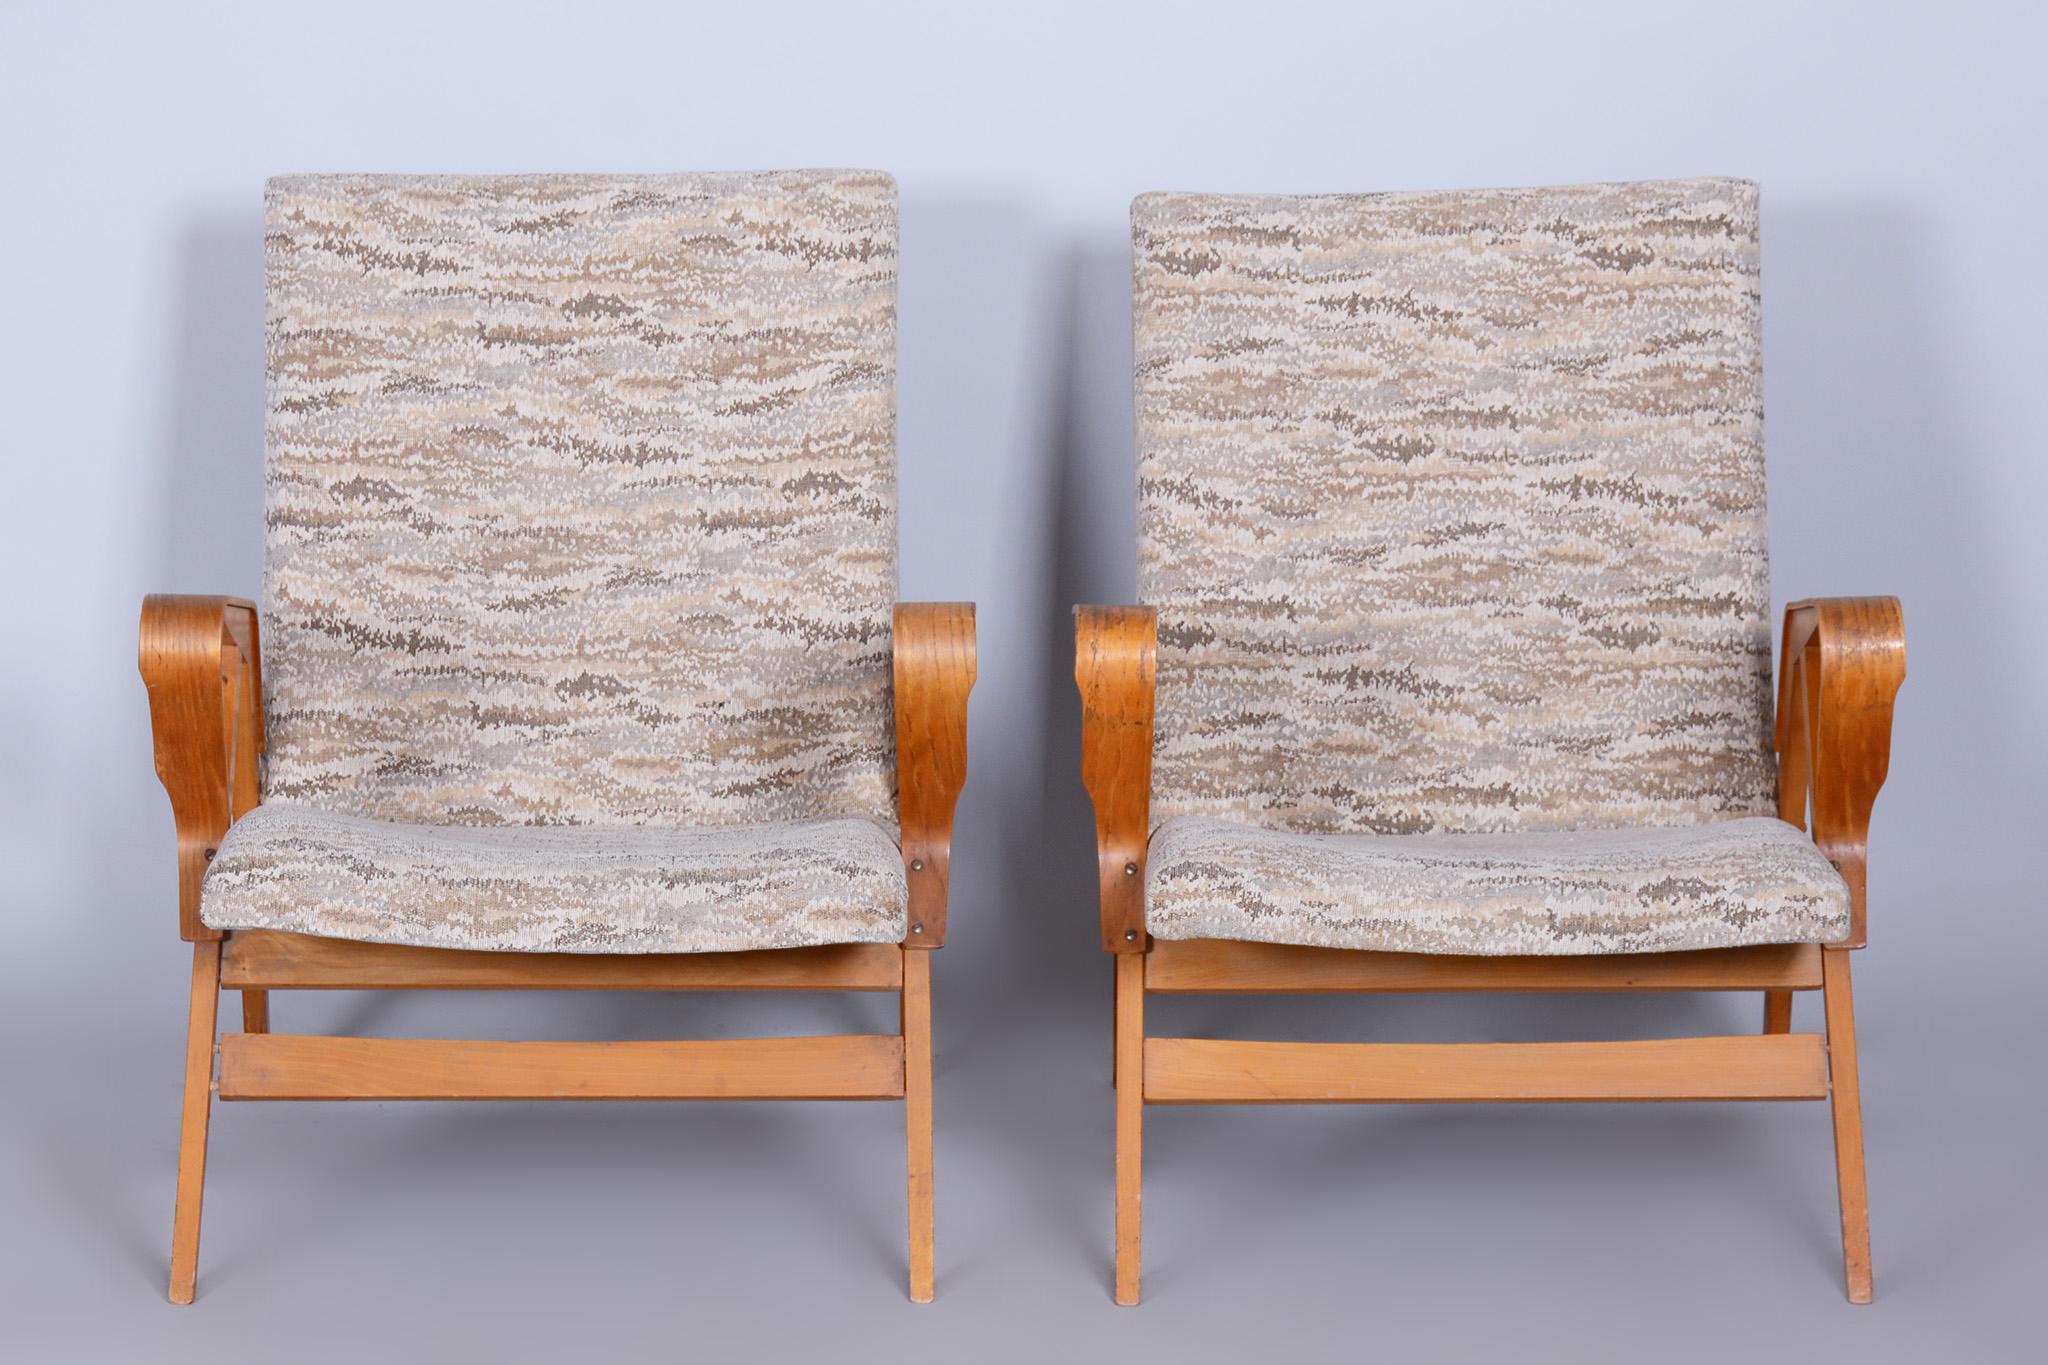 Pair of original midcentury beech armchairs.

Period: 1950-1959
Maker: Tatra - Pravenec
Source: Czechia (Czechoslovakia)
Material: Beech, Fabric

Well-preserved condition.
Professionally cleaned upholstery.